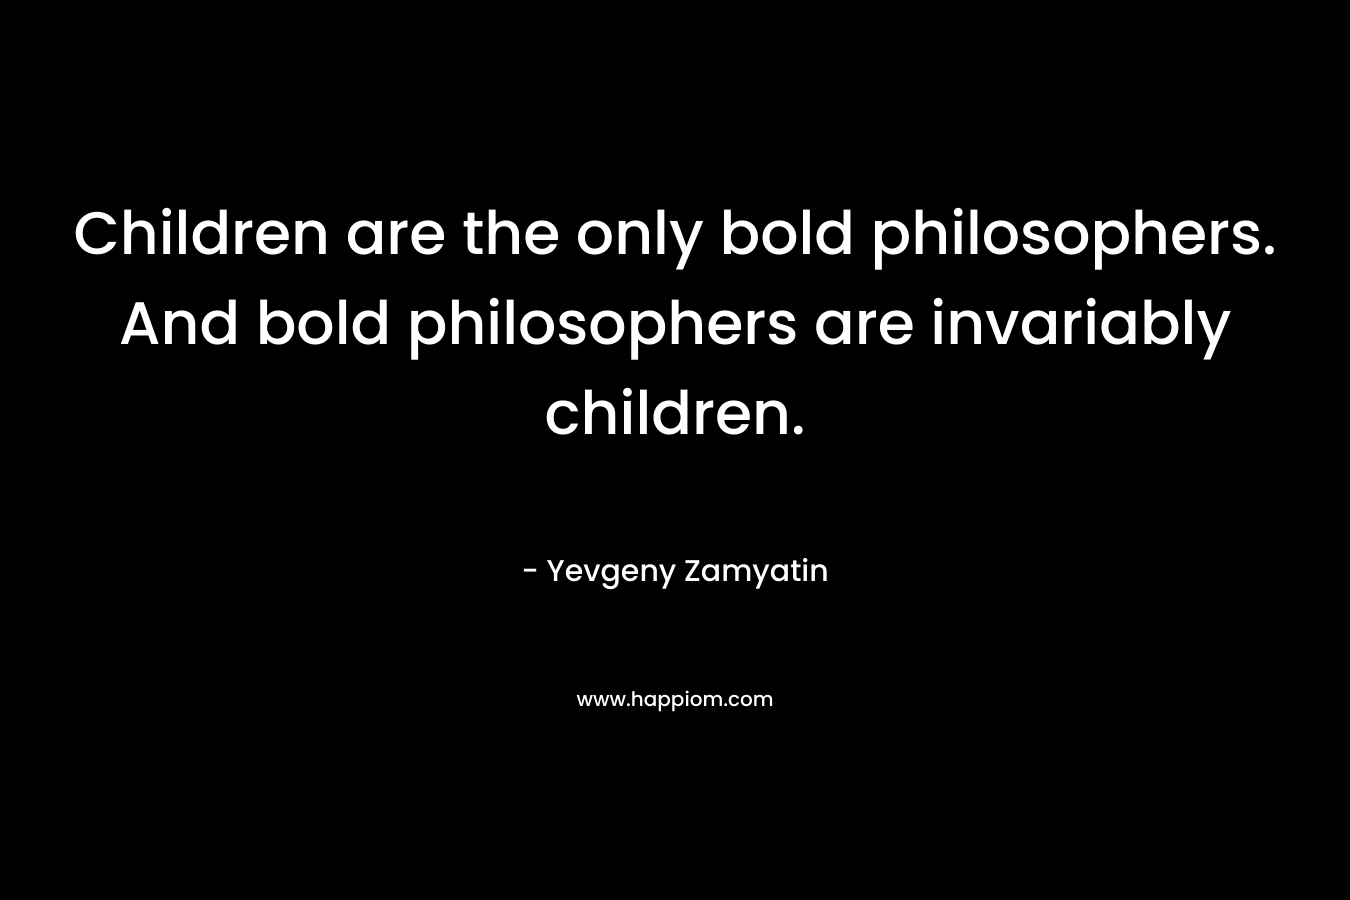 Children are the only bold philosophers. And bold philosophers are invariably children.